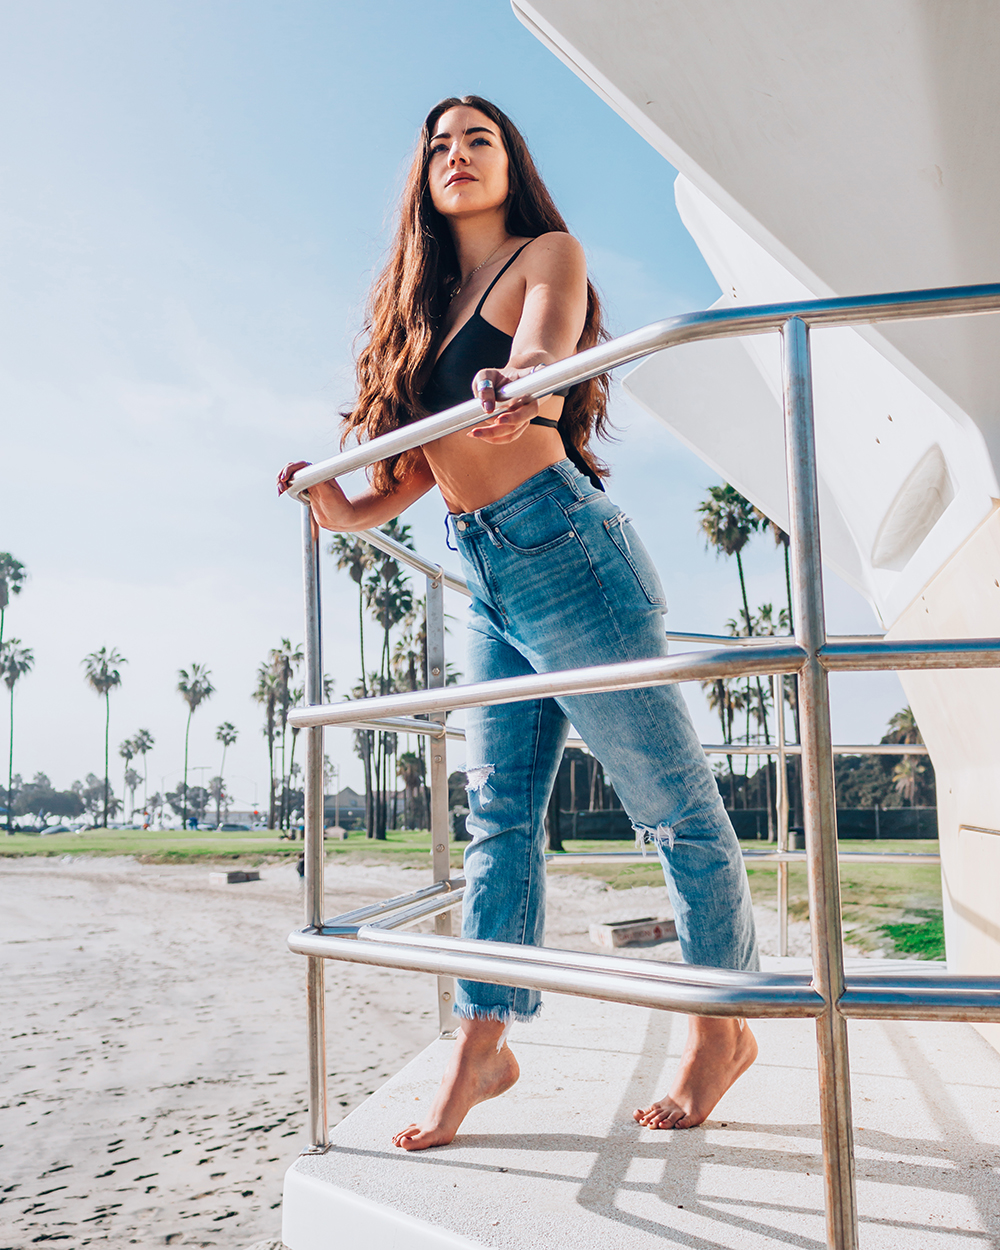 Lauryncakes leans over the railing at a lifegaurd tower in Mission Beachl Sandiego. She is wearing mom jeans and a bikini top